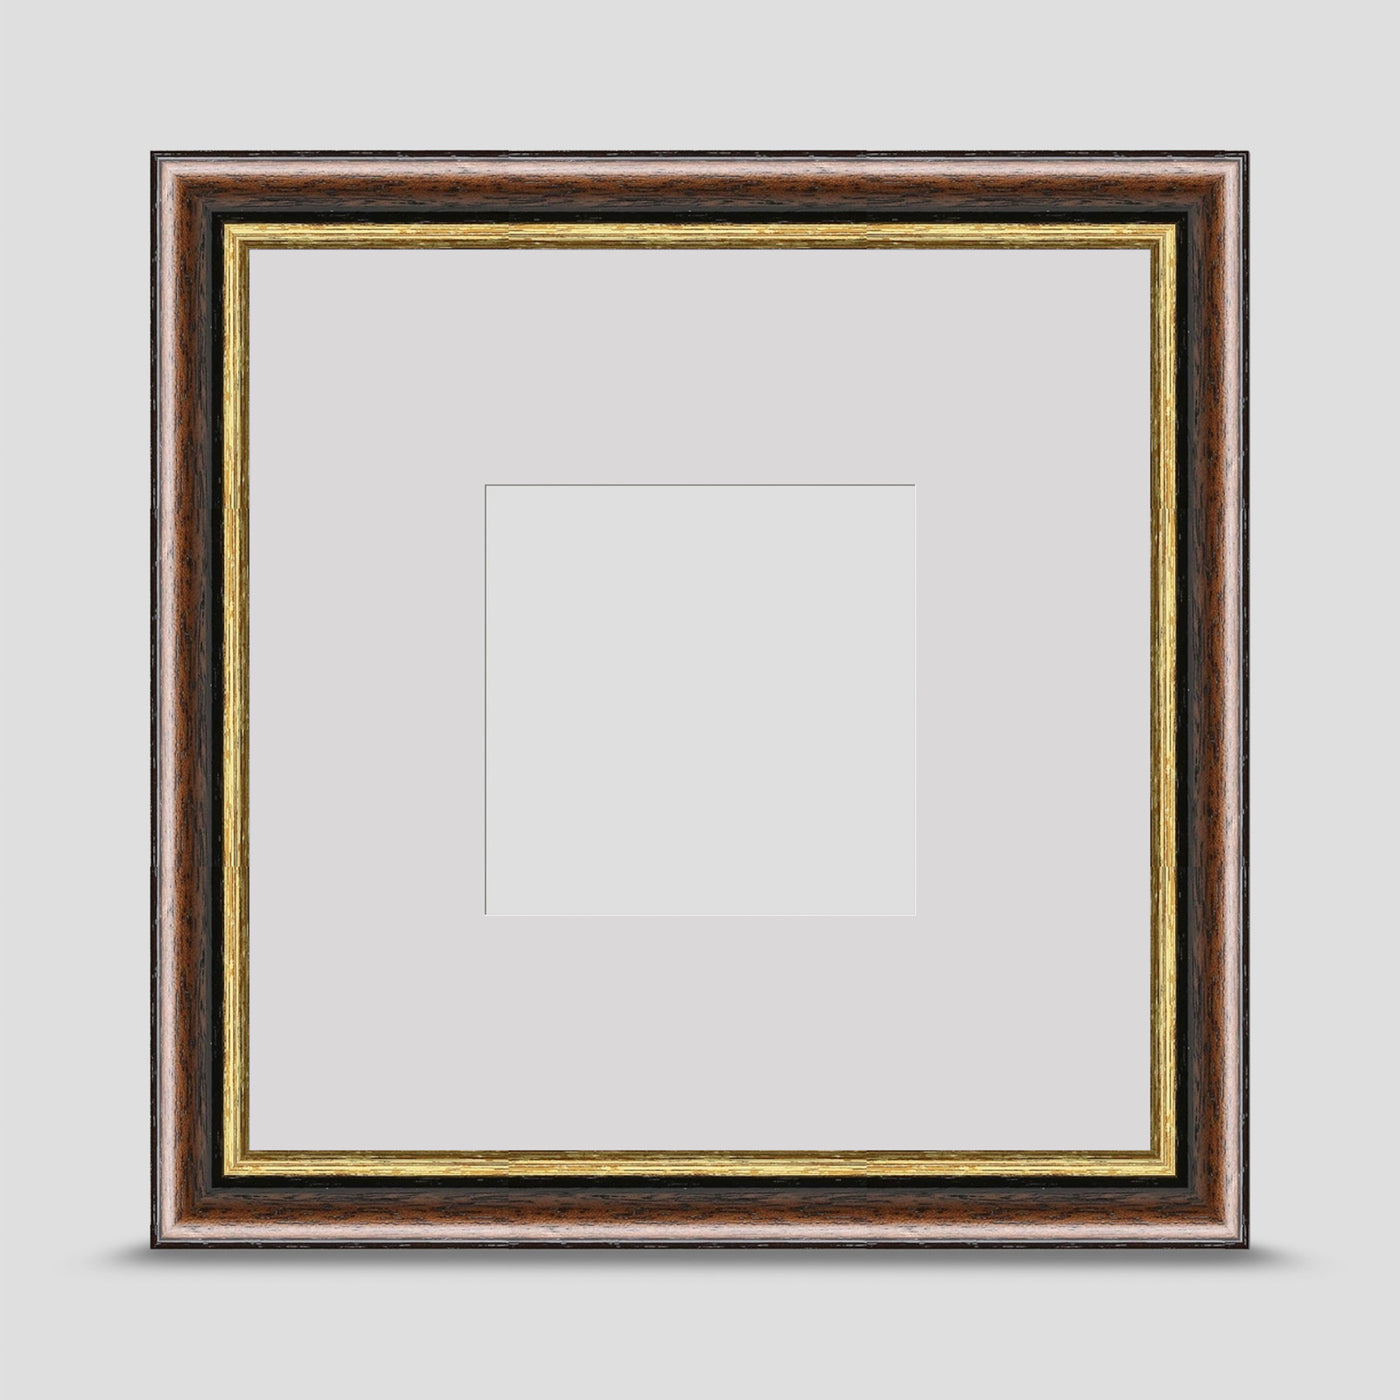 8x8 Brown & Gold Picture Frame with a 4x4 Mount